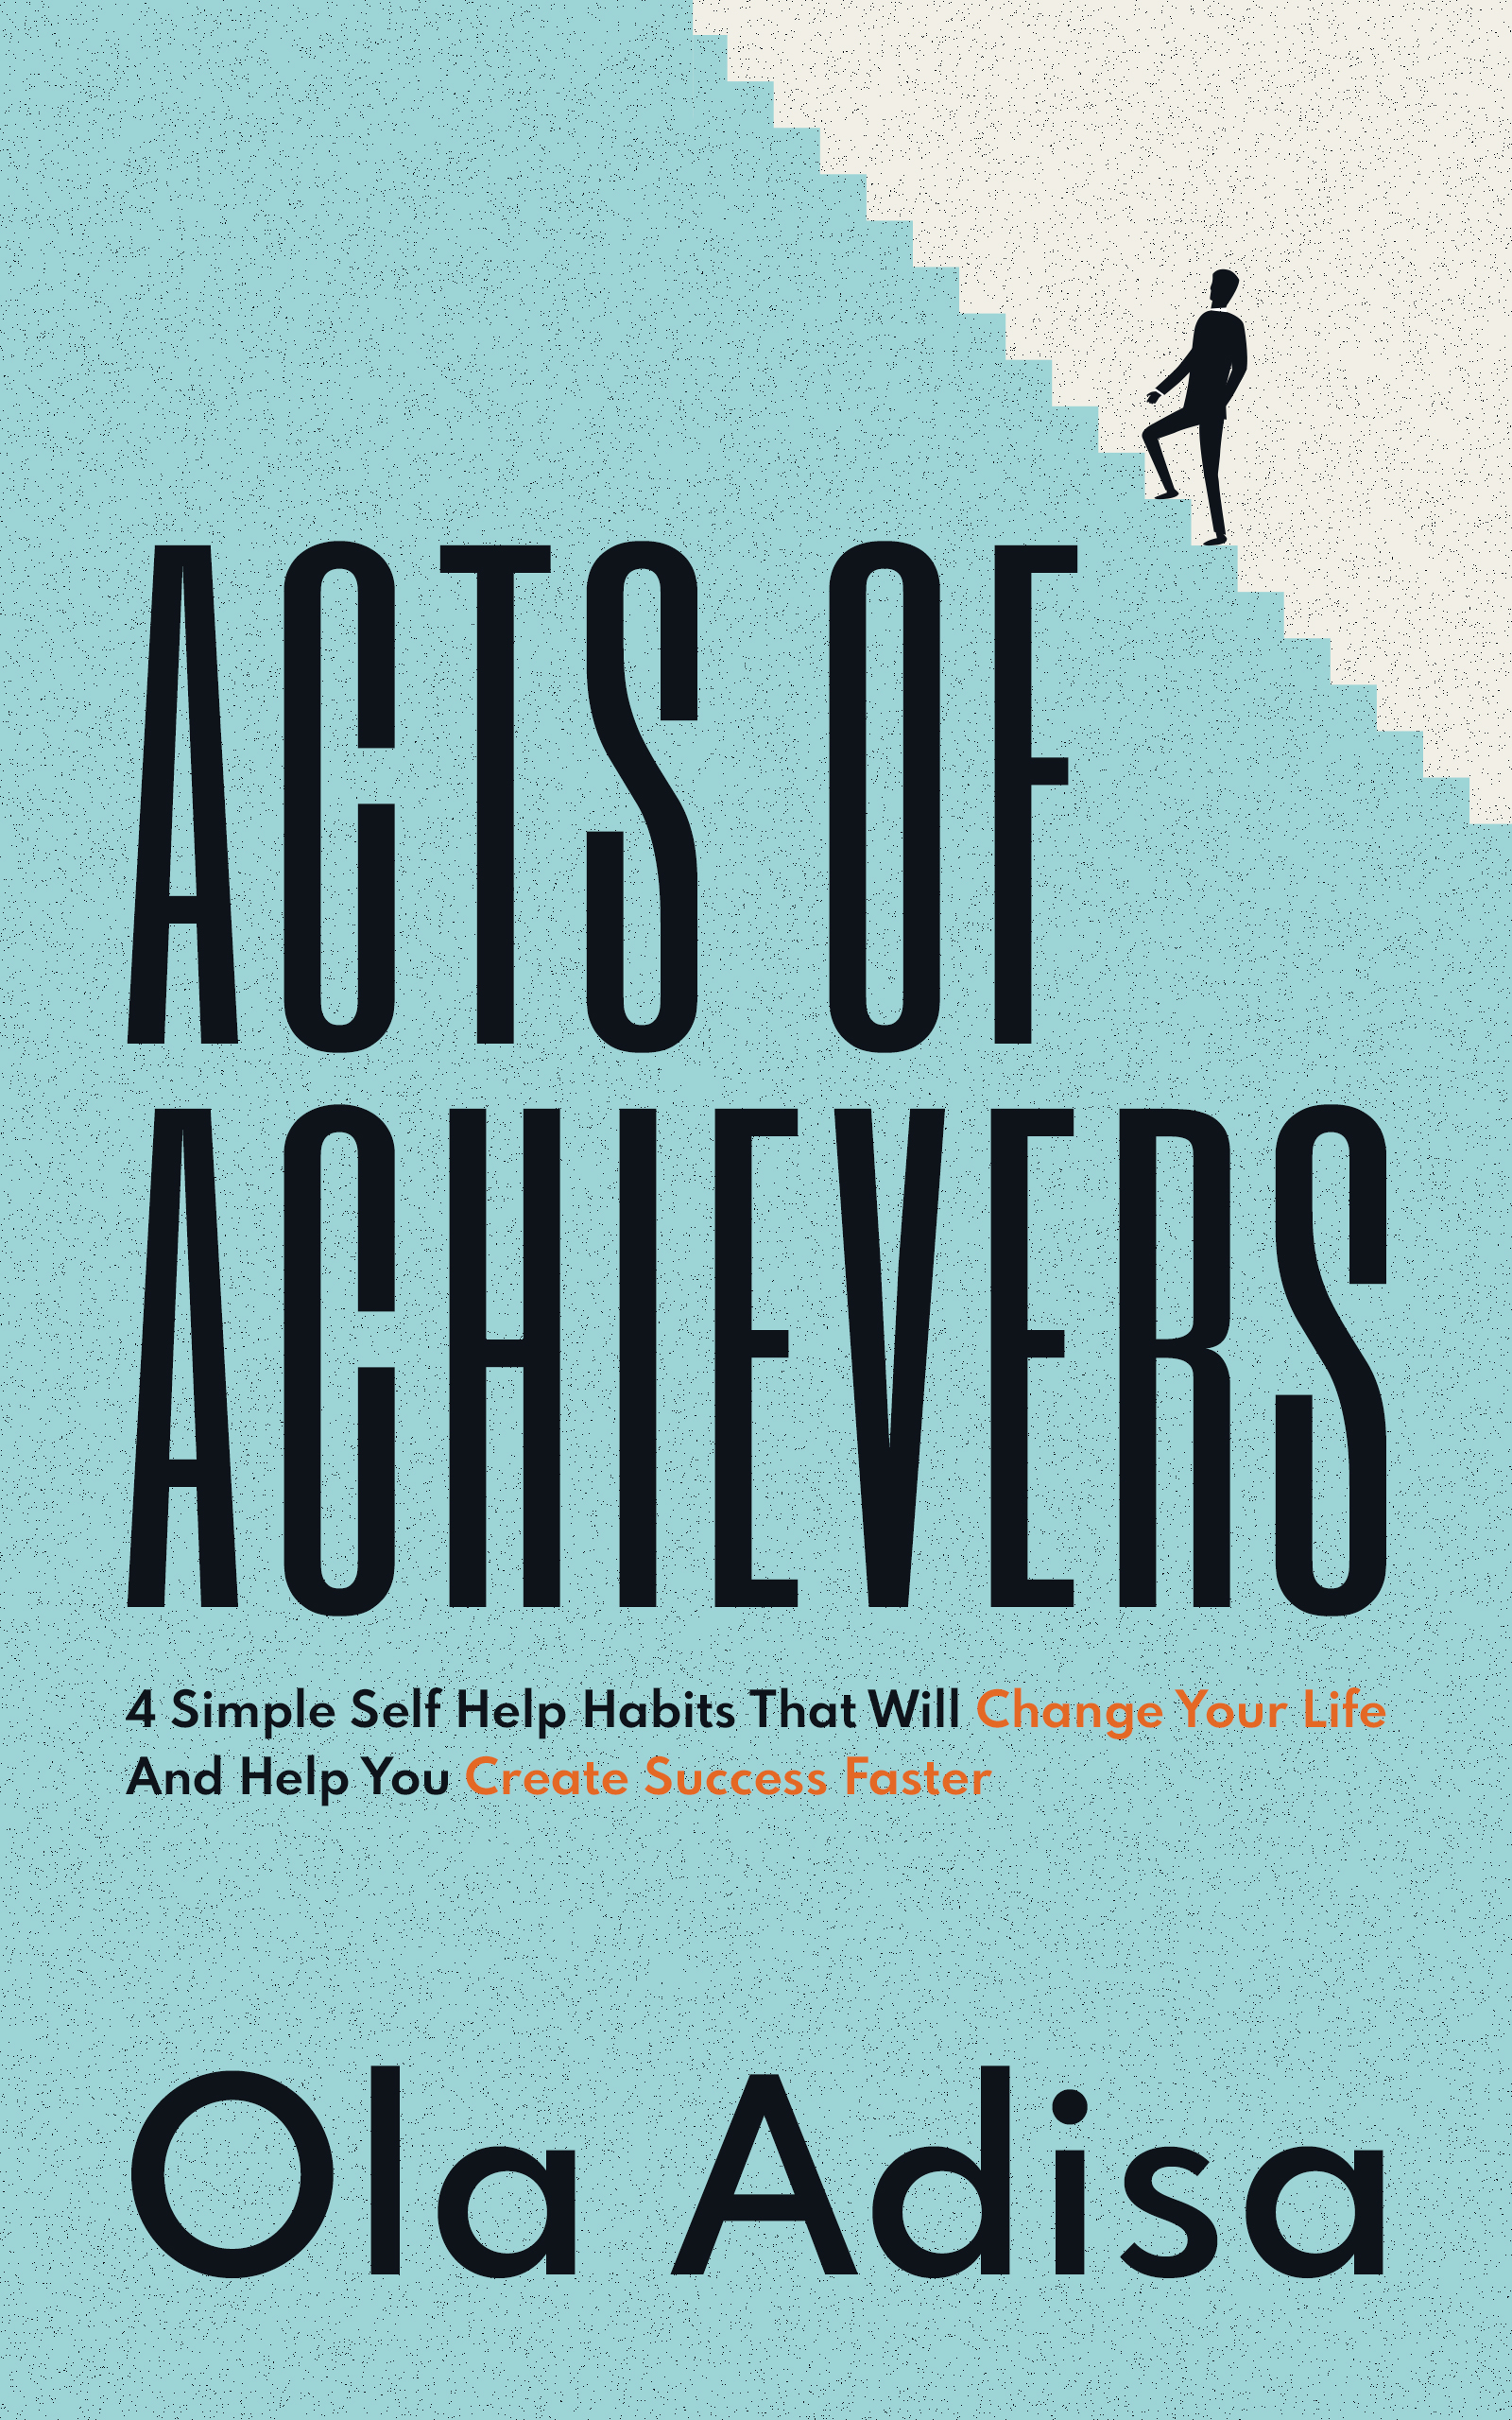 Acts Of Achievers: New Book By Ola Adisa Offers 4 Simple Self Help Life-Changing Habits To Help Readers Find Their Purpose In Life